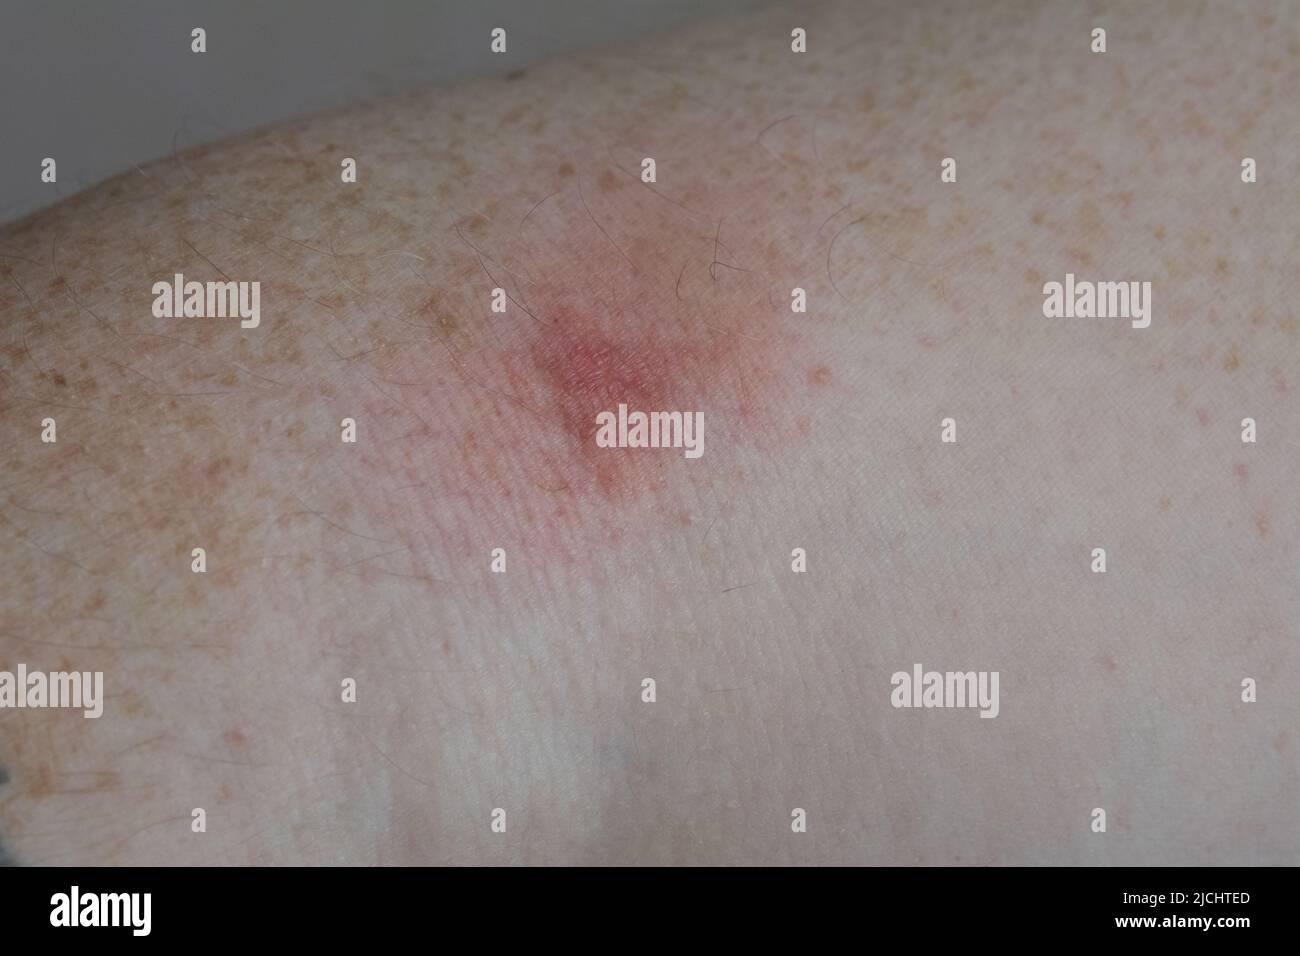 Irritation from an insect bite. Trace irritation from a bite by an unknown insect on the arm of a white European man Stock Photo